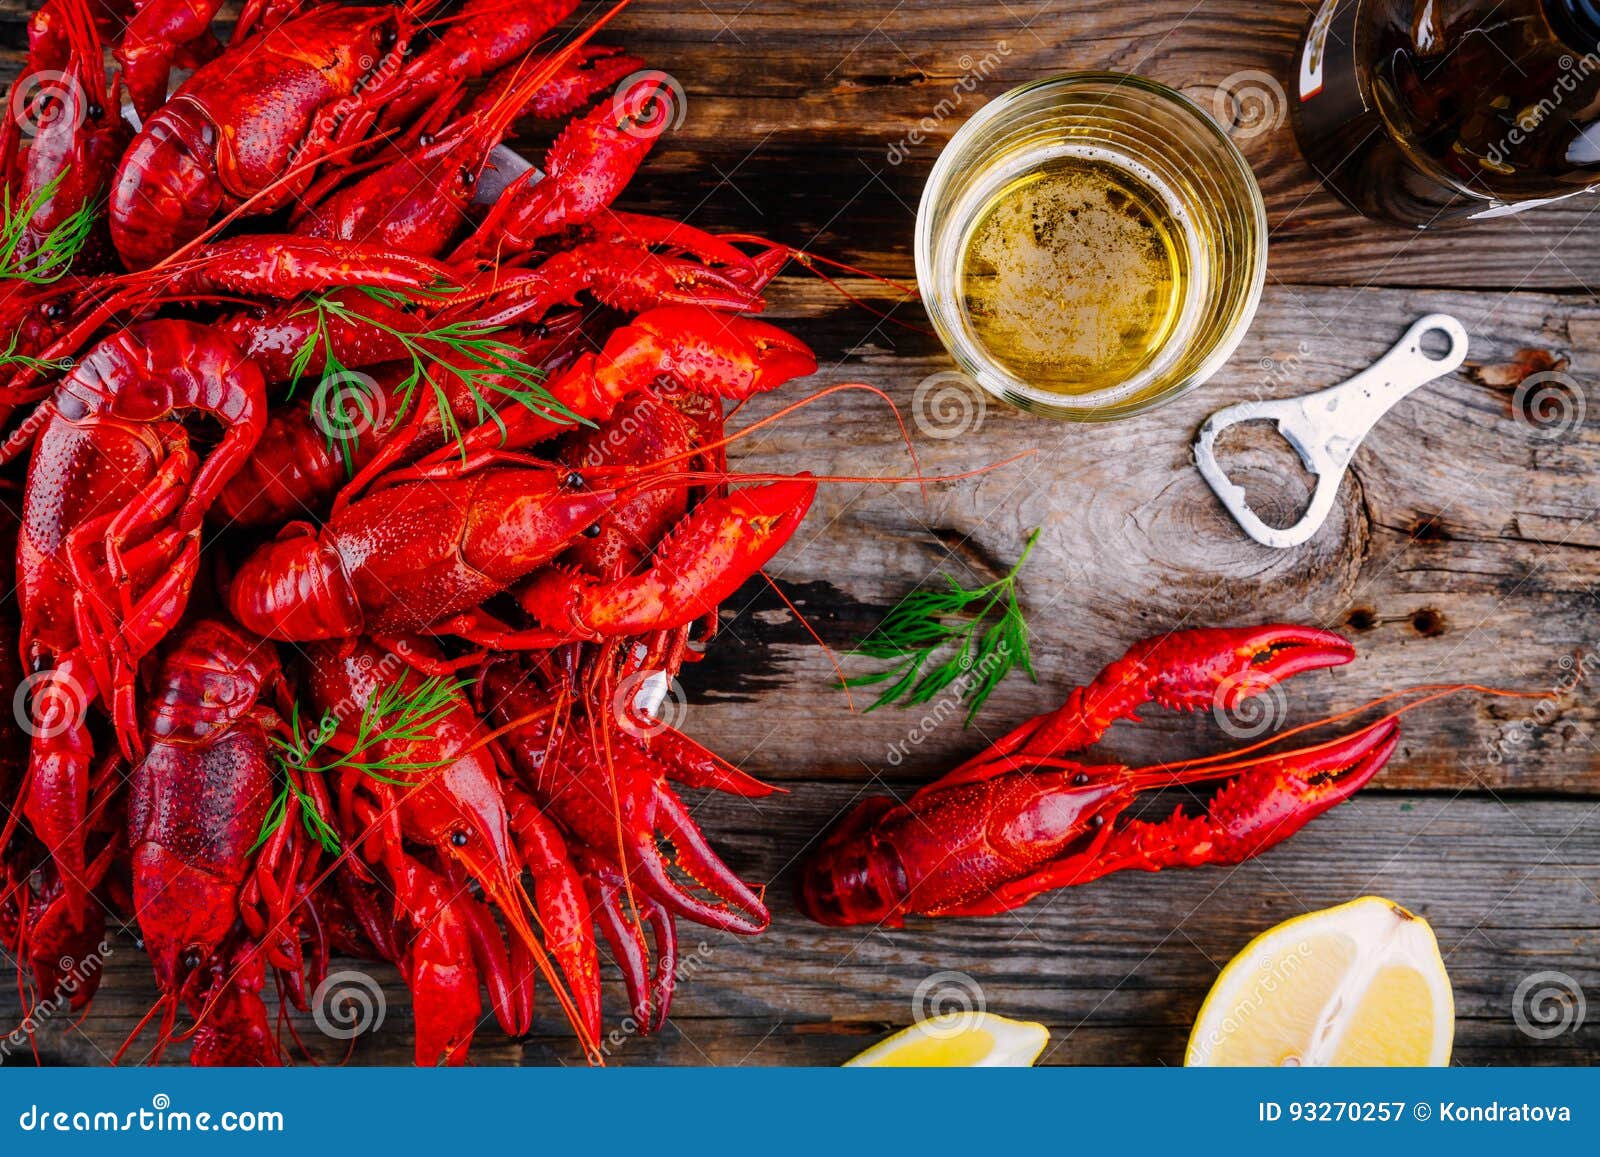 boiled crayfish with dill and beer